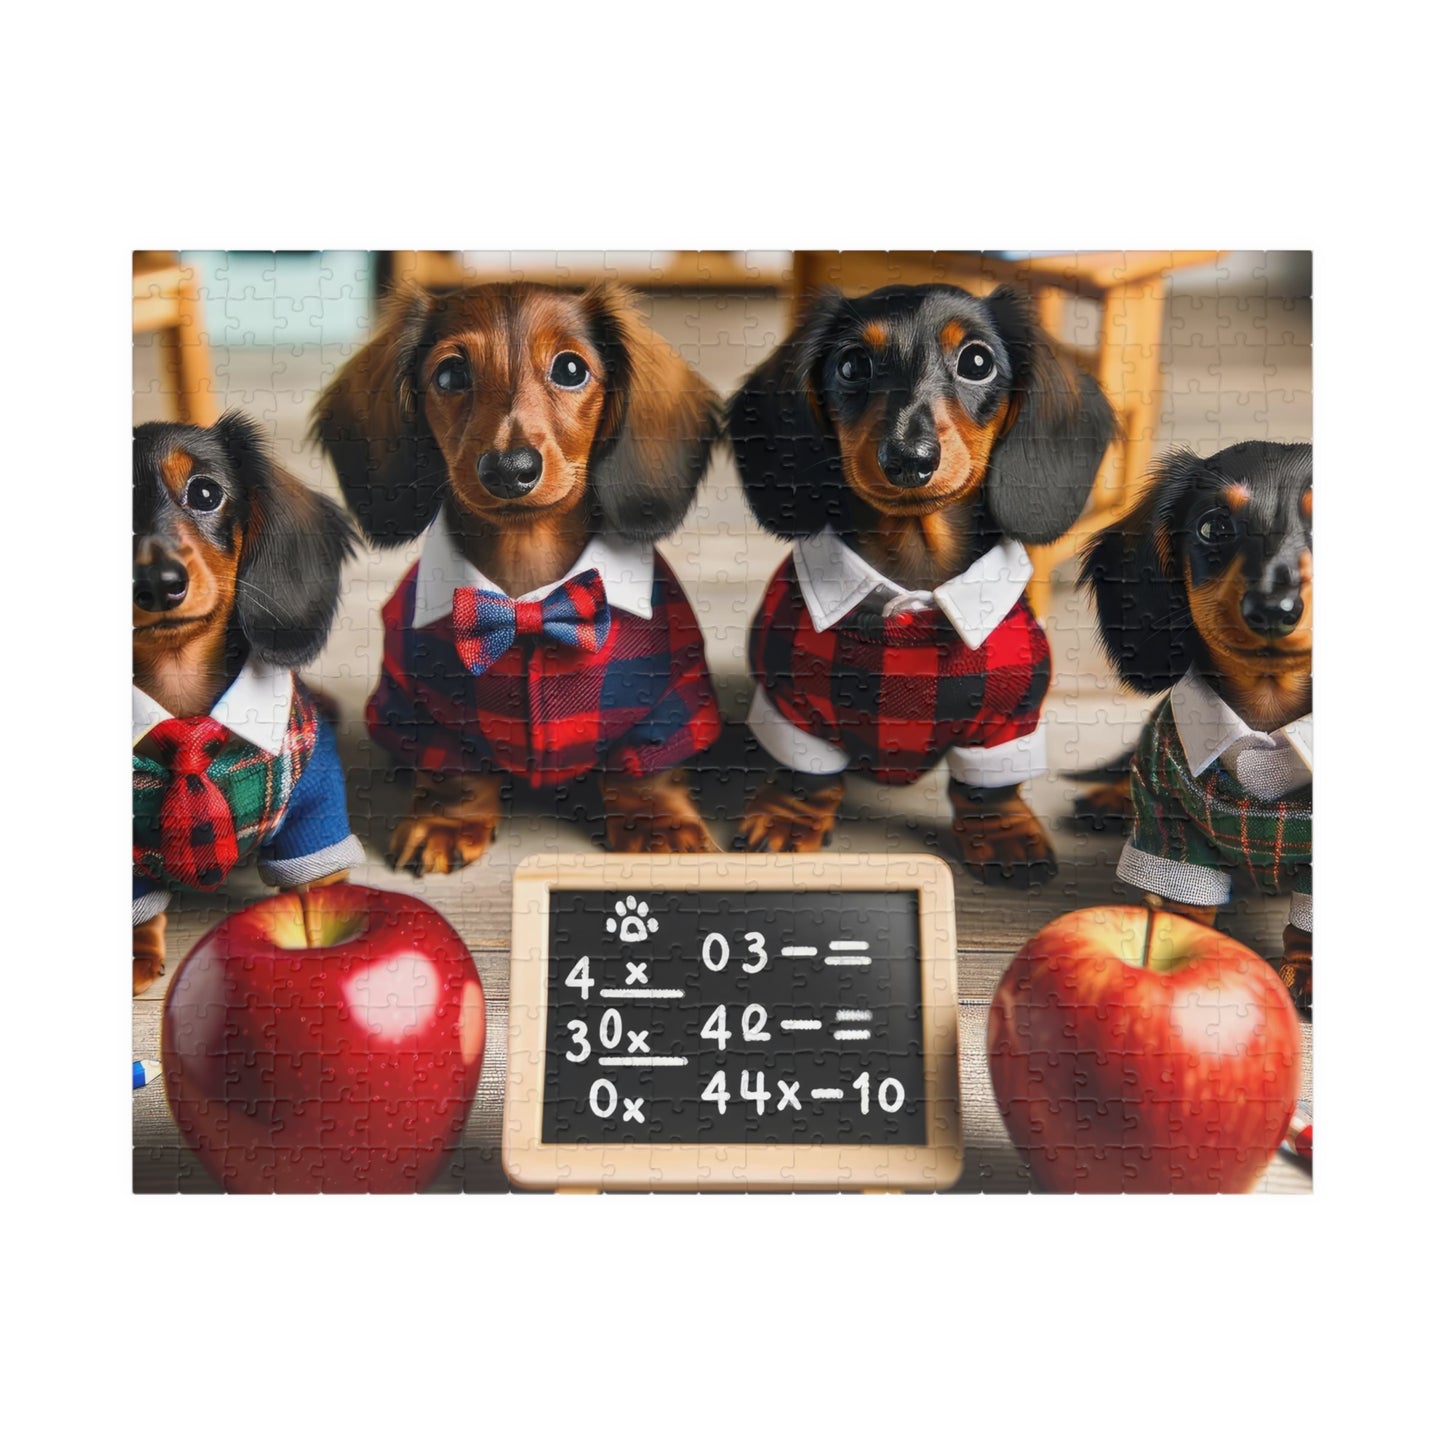 Adorable Classroom Miniature Dachshund Jigsaw Puzzle - Mini Doxie Puppy 110, 252, 520 or 1014 Pieces